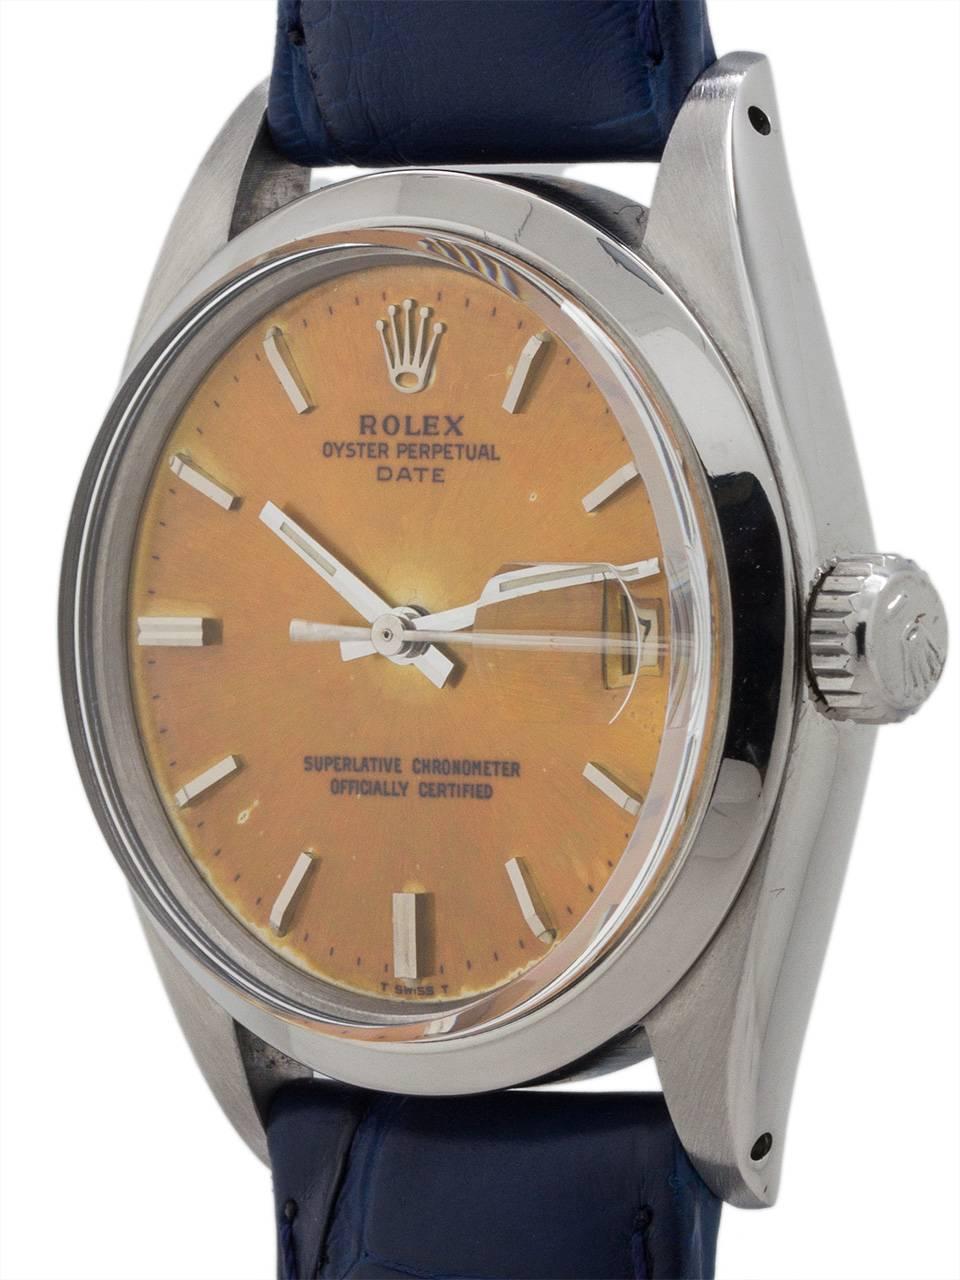 Rolex Stainless Steel Oyster Perpetual Date ref 1500 serial #.2 million circa 1965. Featuring a 34mm diameter Oyster case with smooth bezel and acrylic crystal and with an original silvered satin dial that has turned a pronounced golden yellow hue.